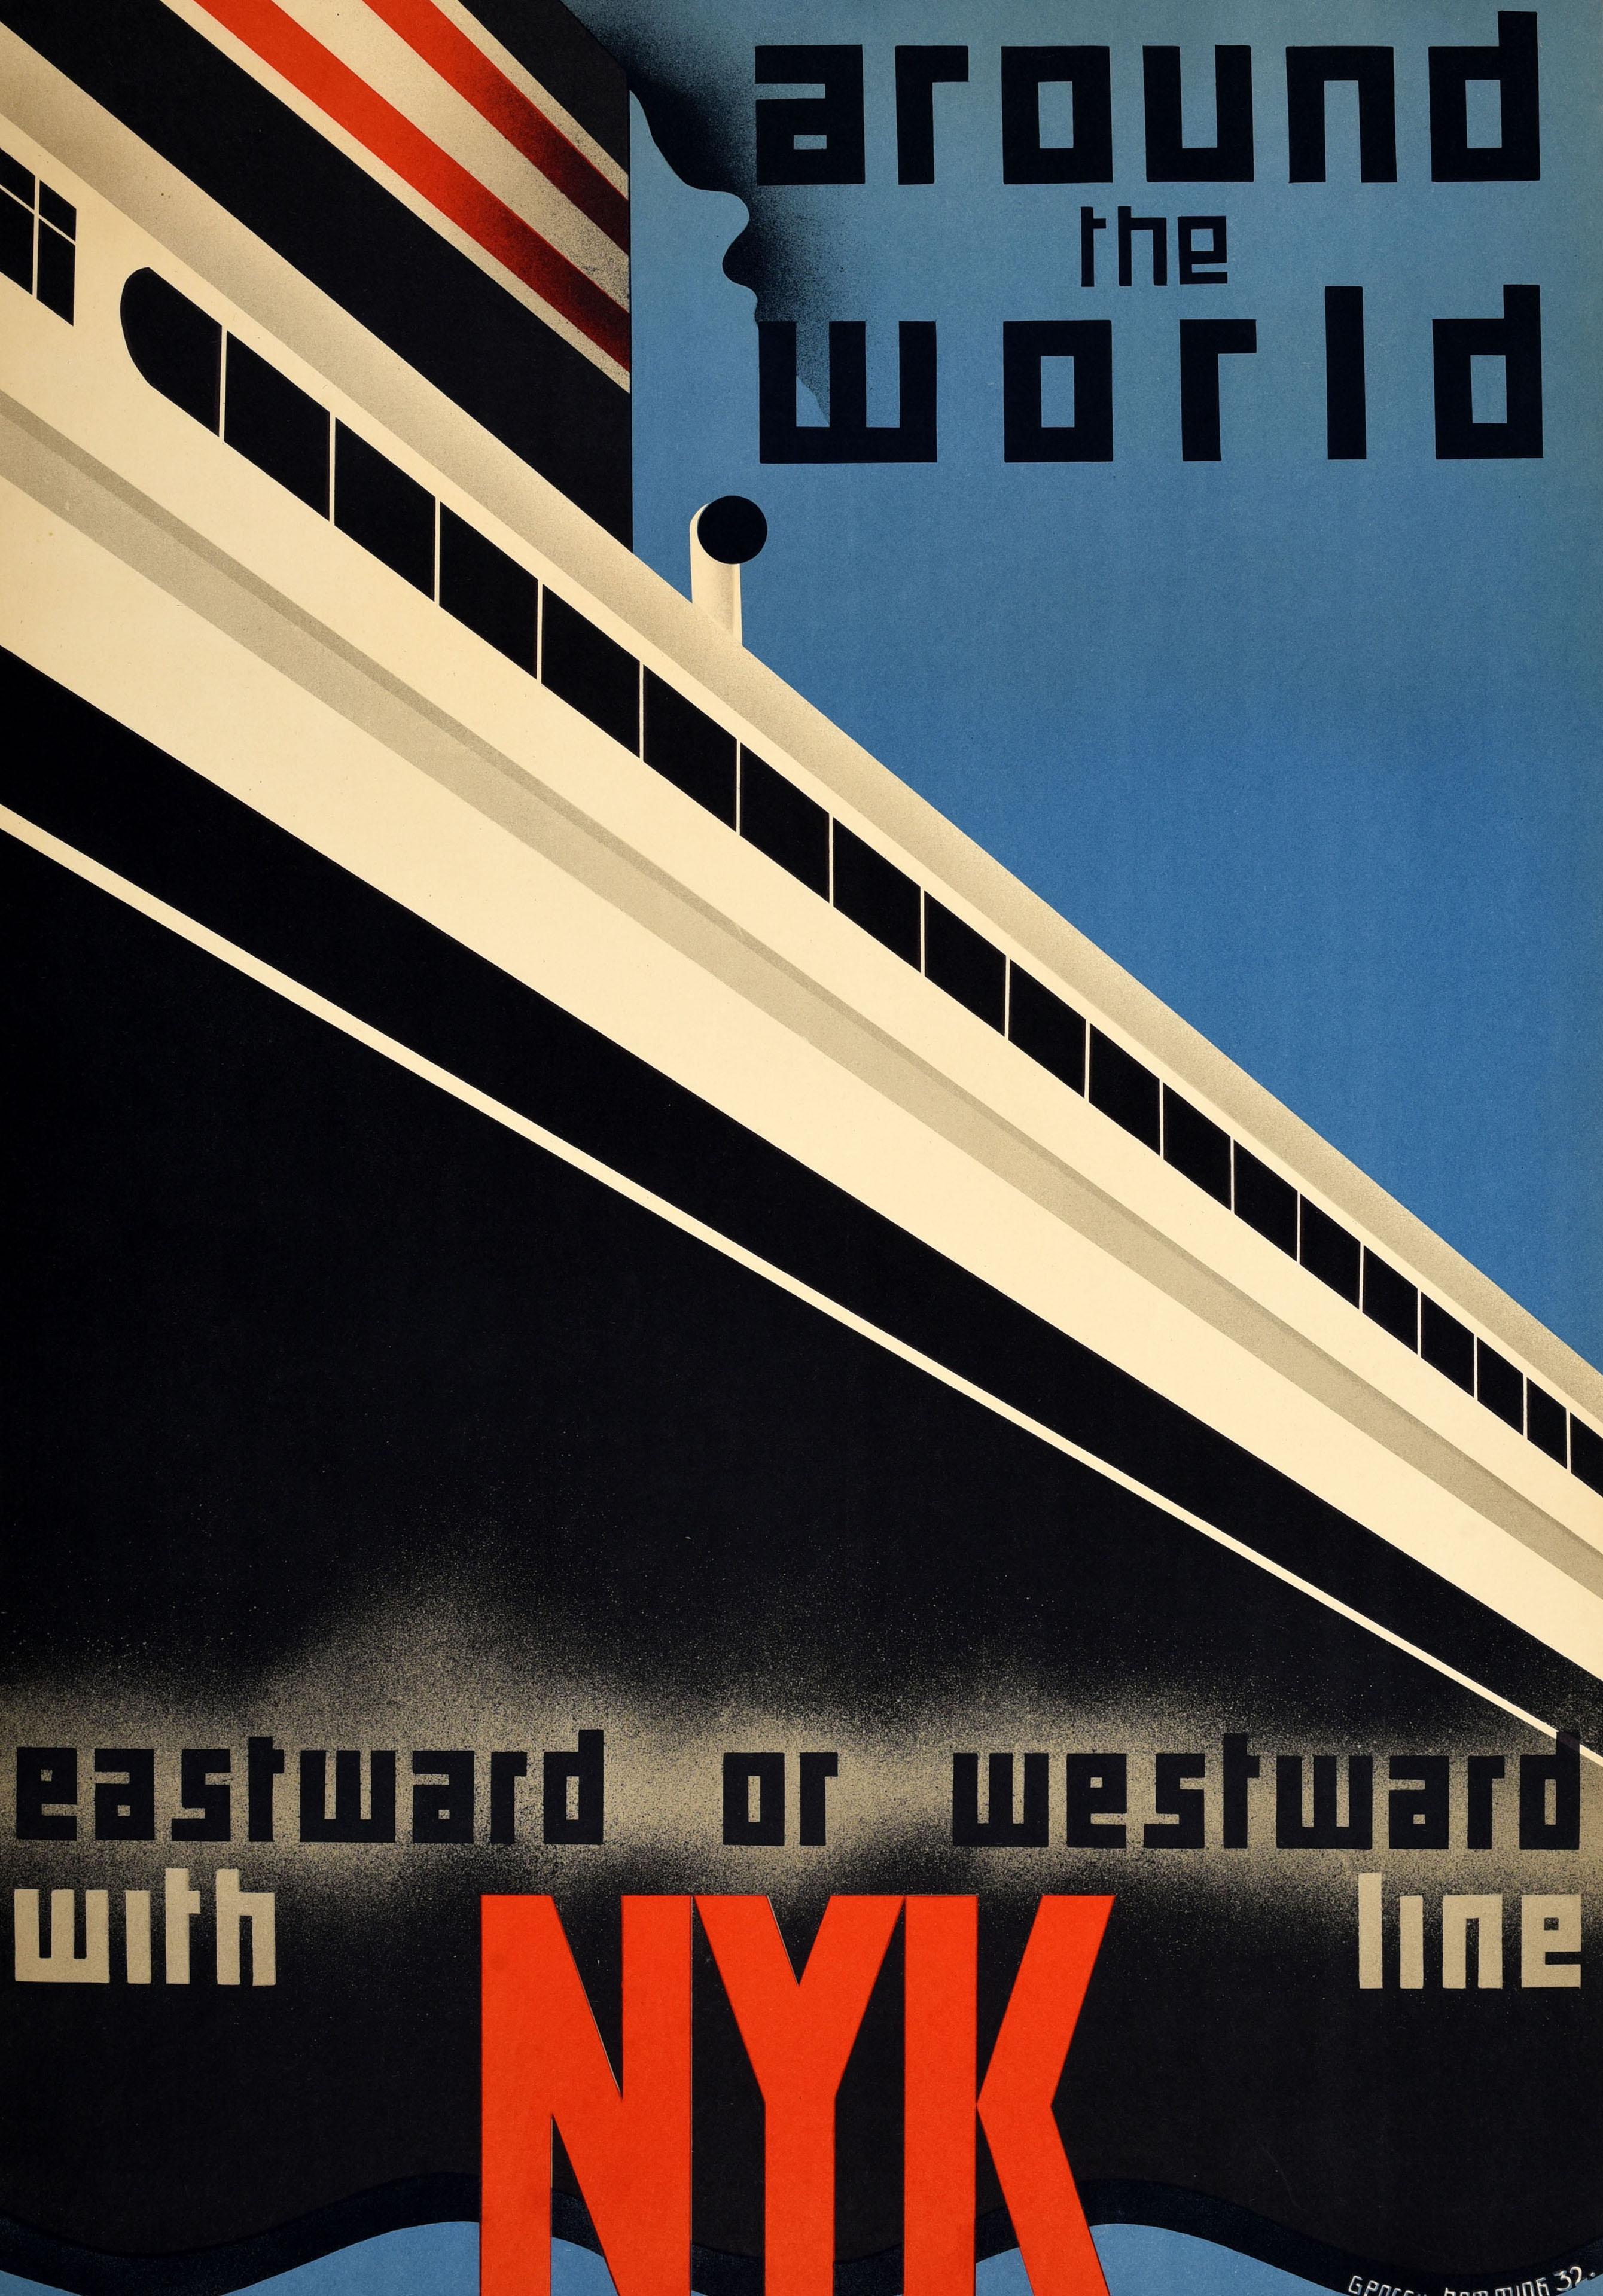 Original vintage travel advertising poster - Around the World Eastward or Westward with NYK Line - featuring a stunning streamlined Art Deco design by the Swedish artist Gosta Georgii Hemming (1910-1986) depicting a steamship sailing at speed